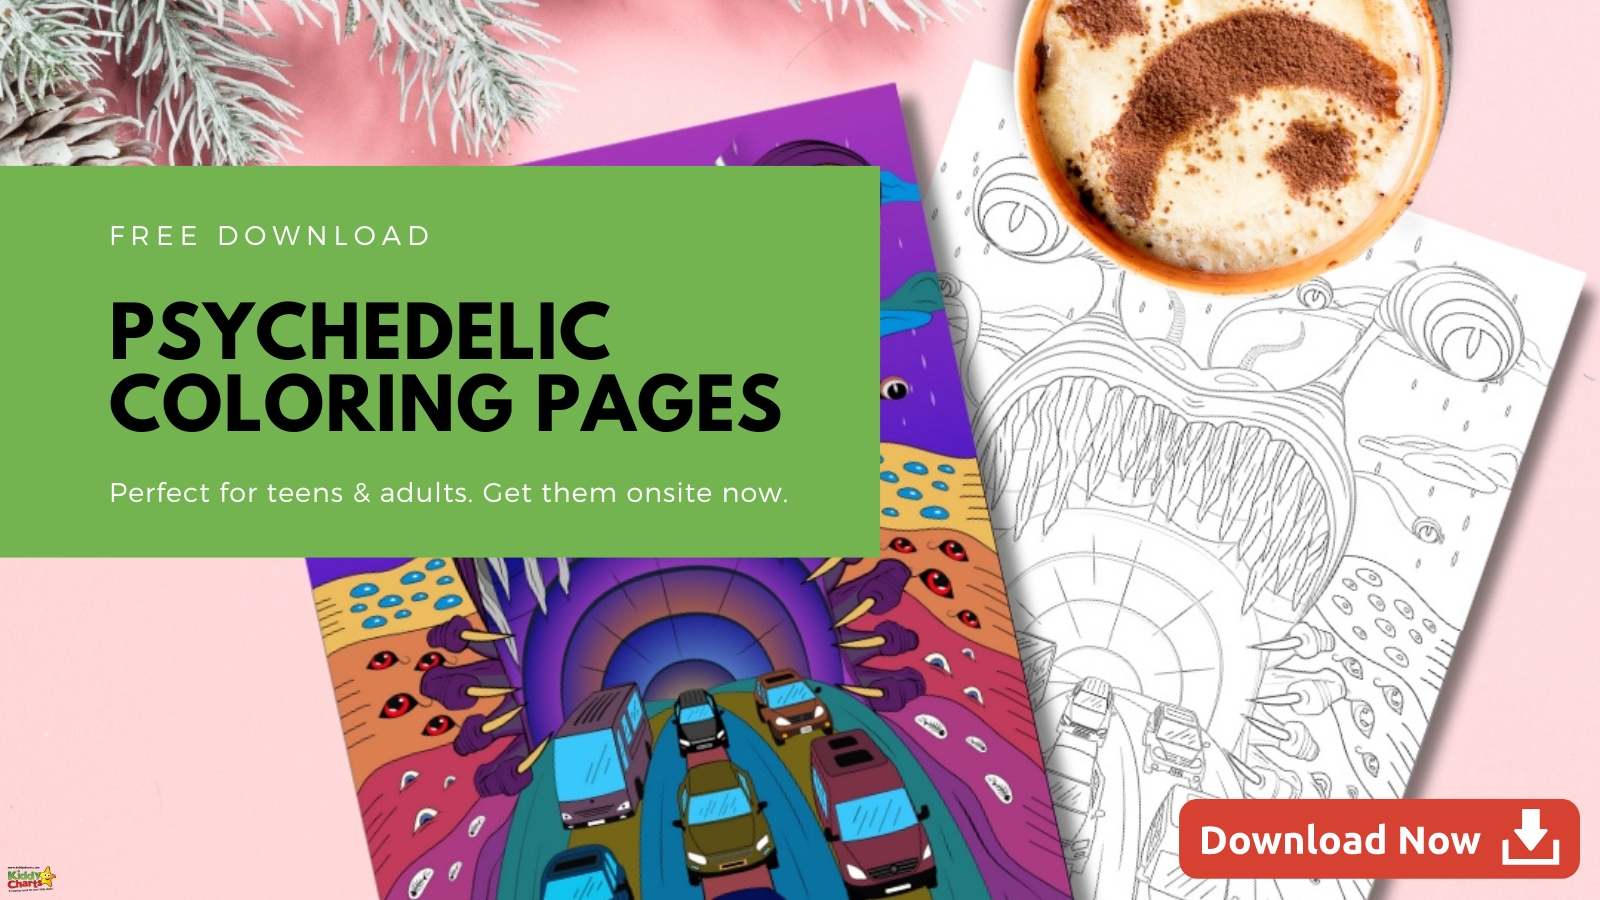 Psychedelic posters and coloring pages for adults and teens